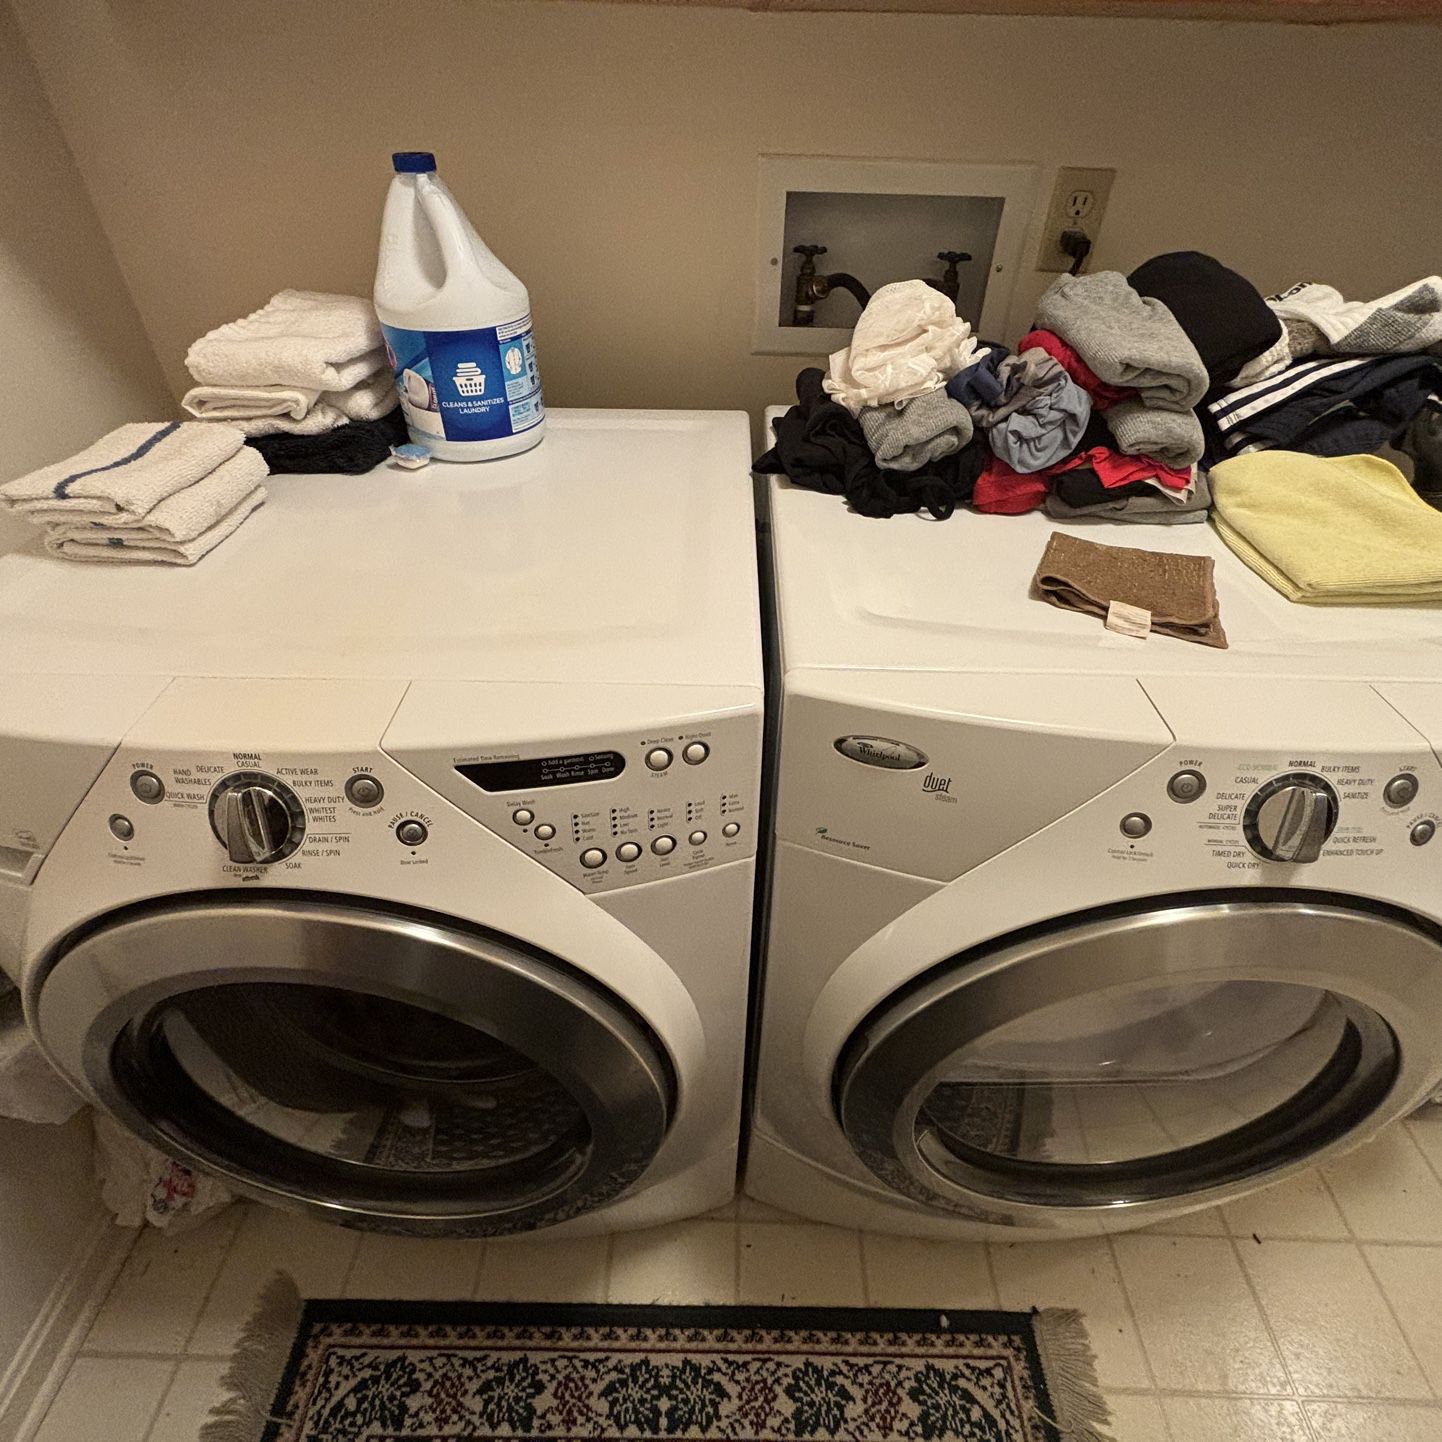 Whirlpool Front Loader Washer and Gas Dryer